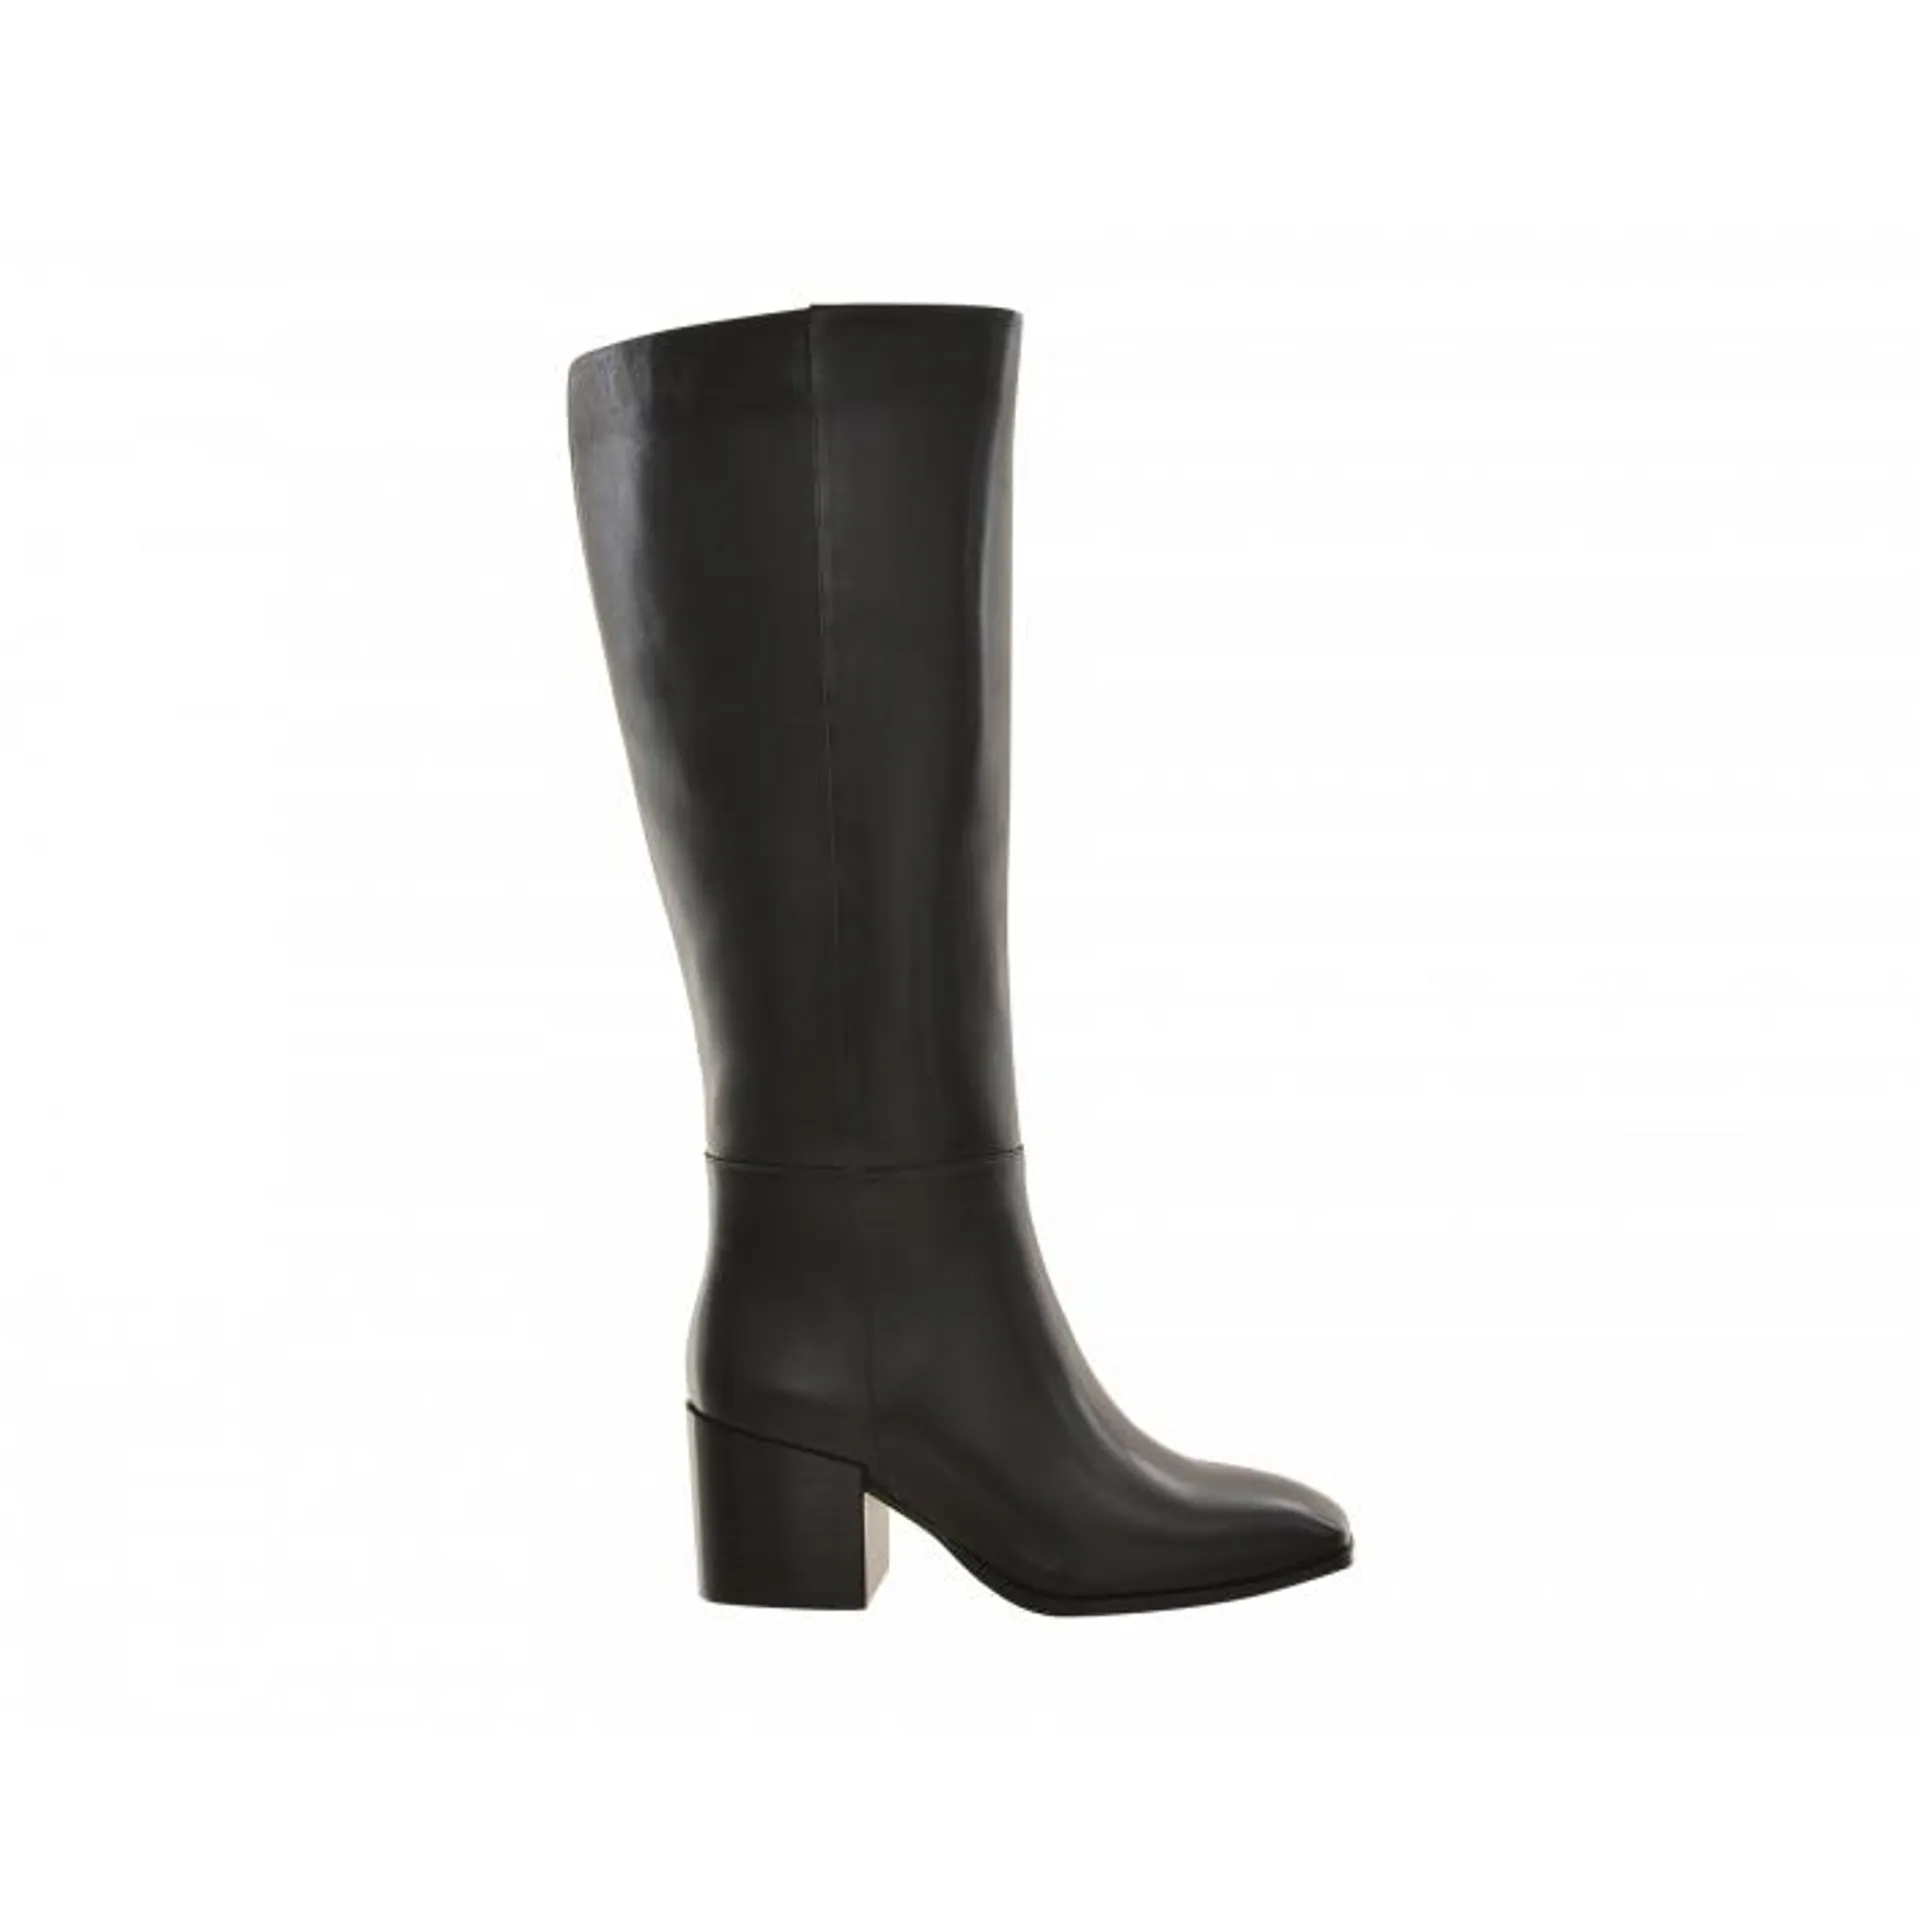 Saffron Browne Mh Leather Tall Boot